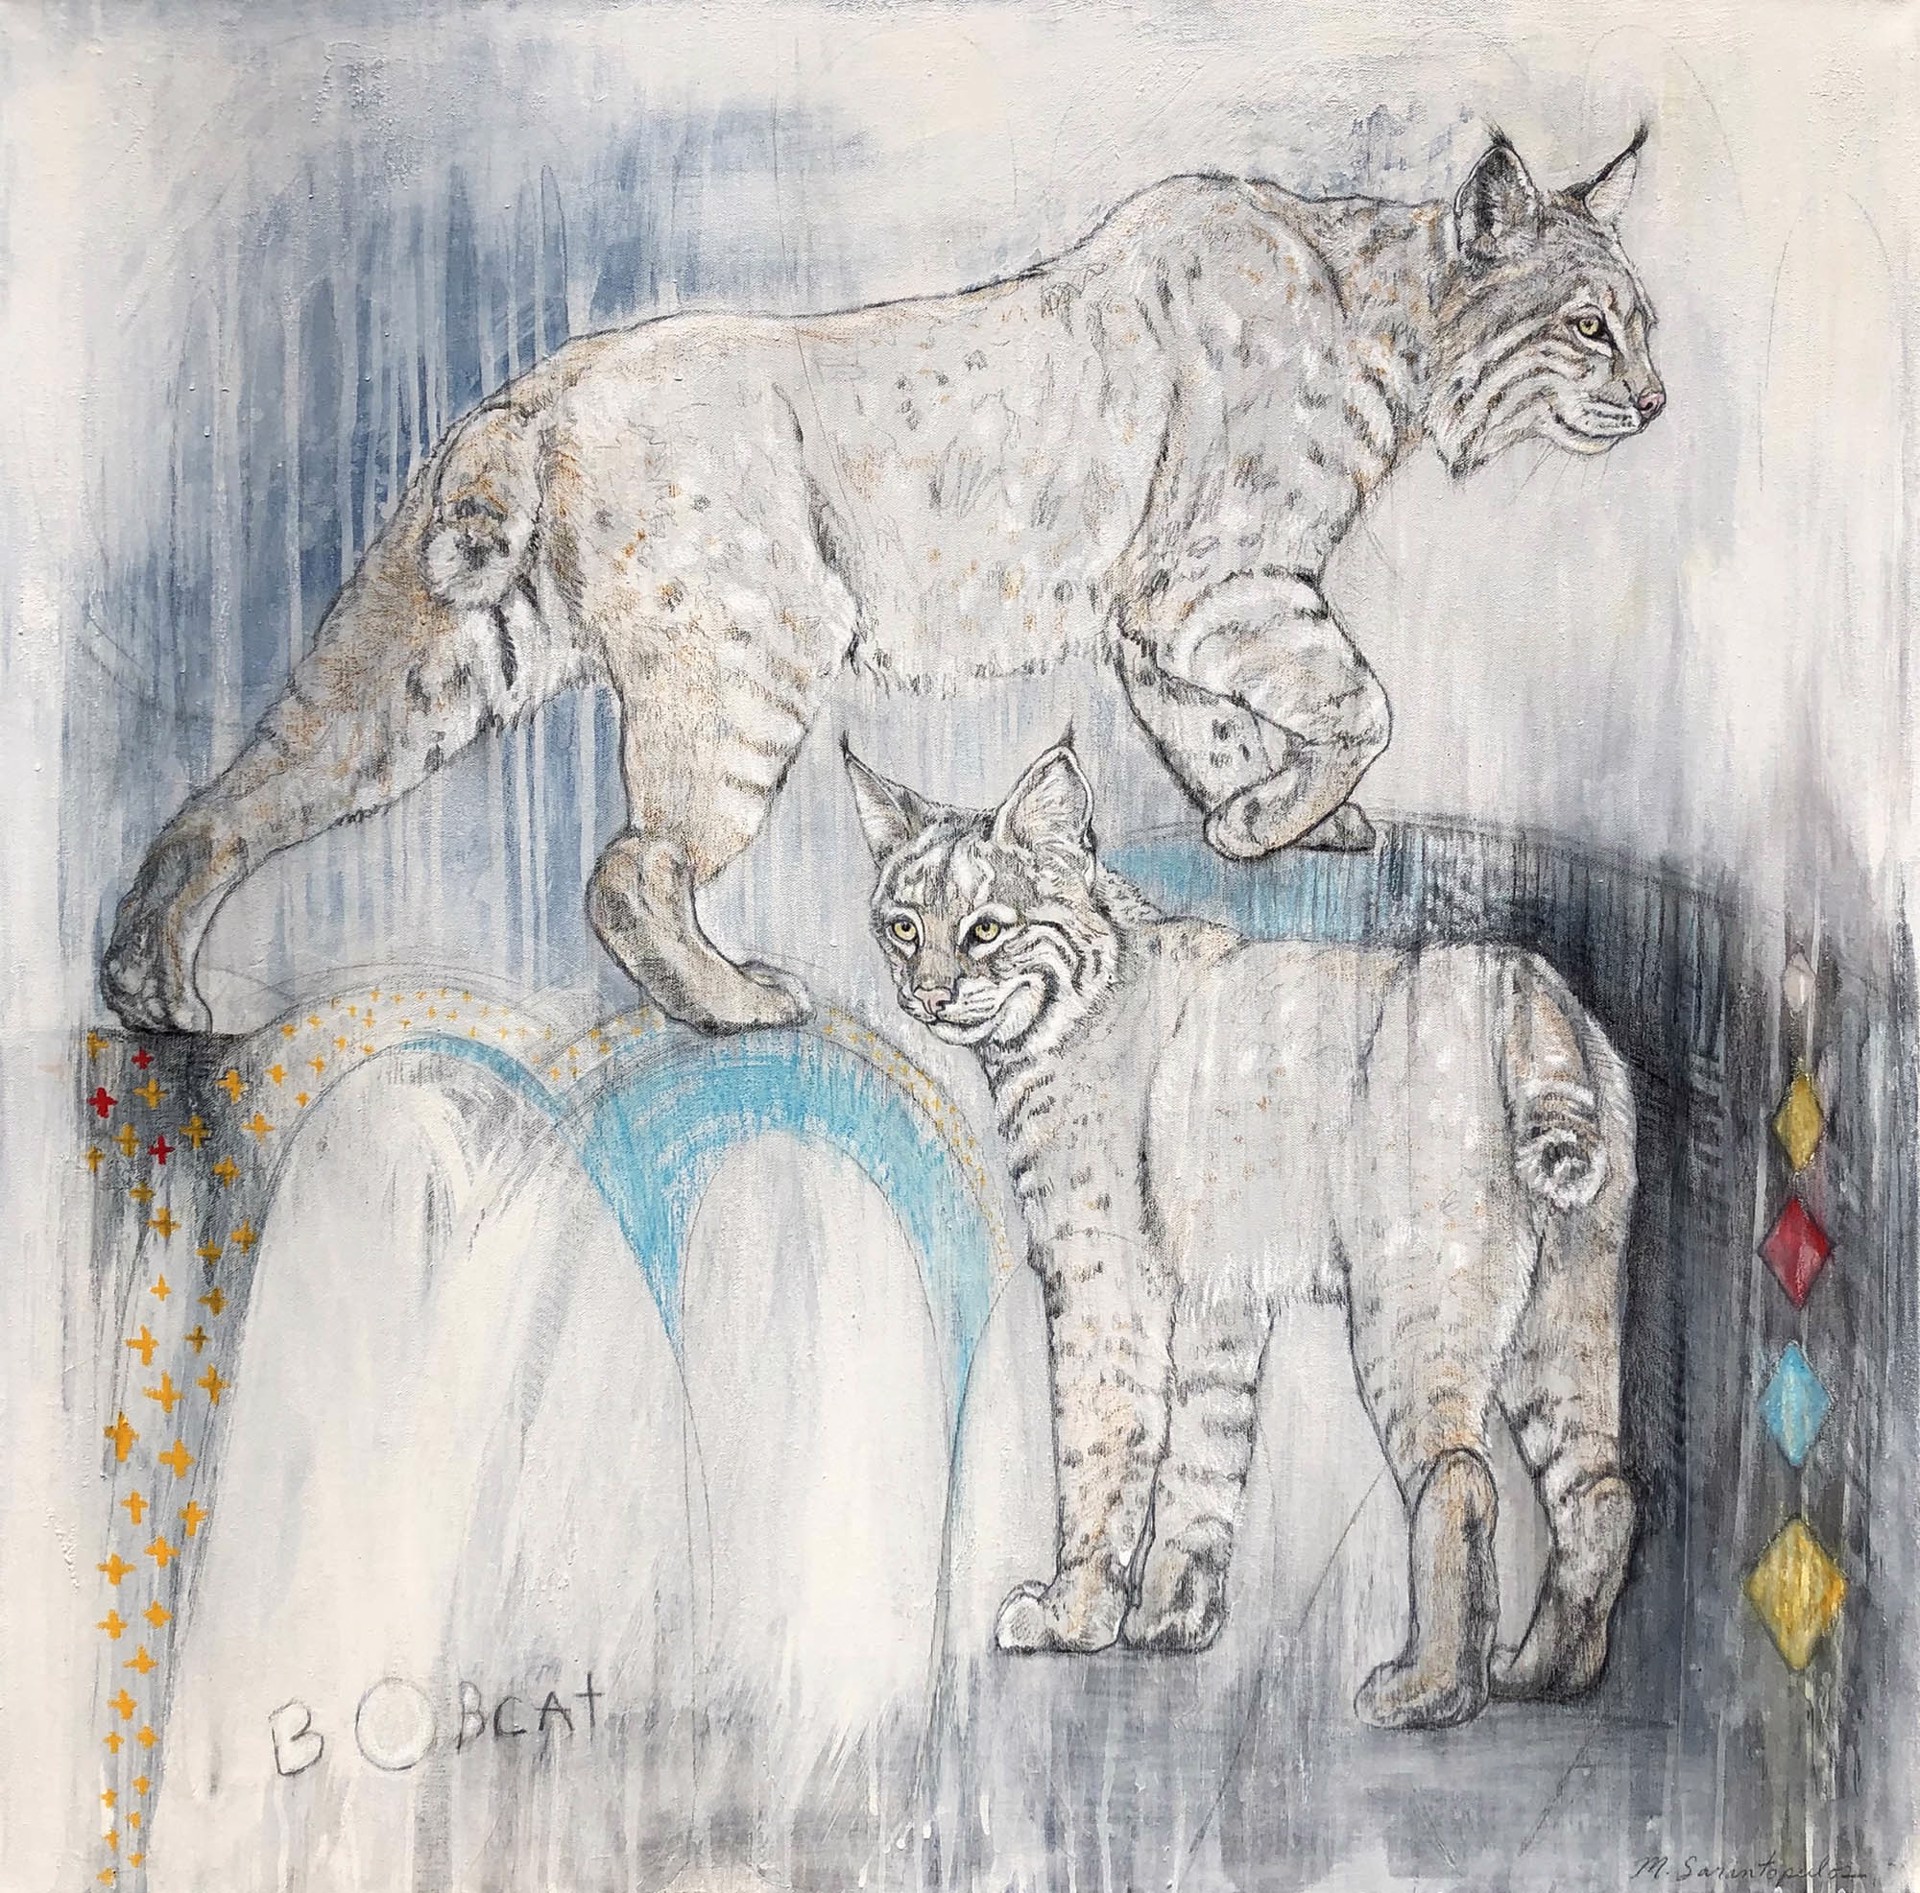 Original Mixed Media Painting Featuring Two Bobcats Sketched Over Abstract Background With Doodle Details And Motifs